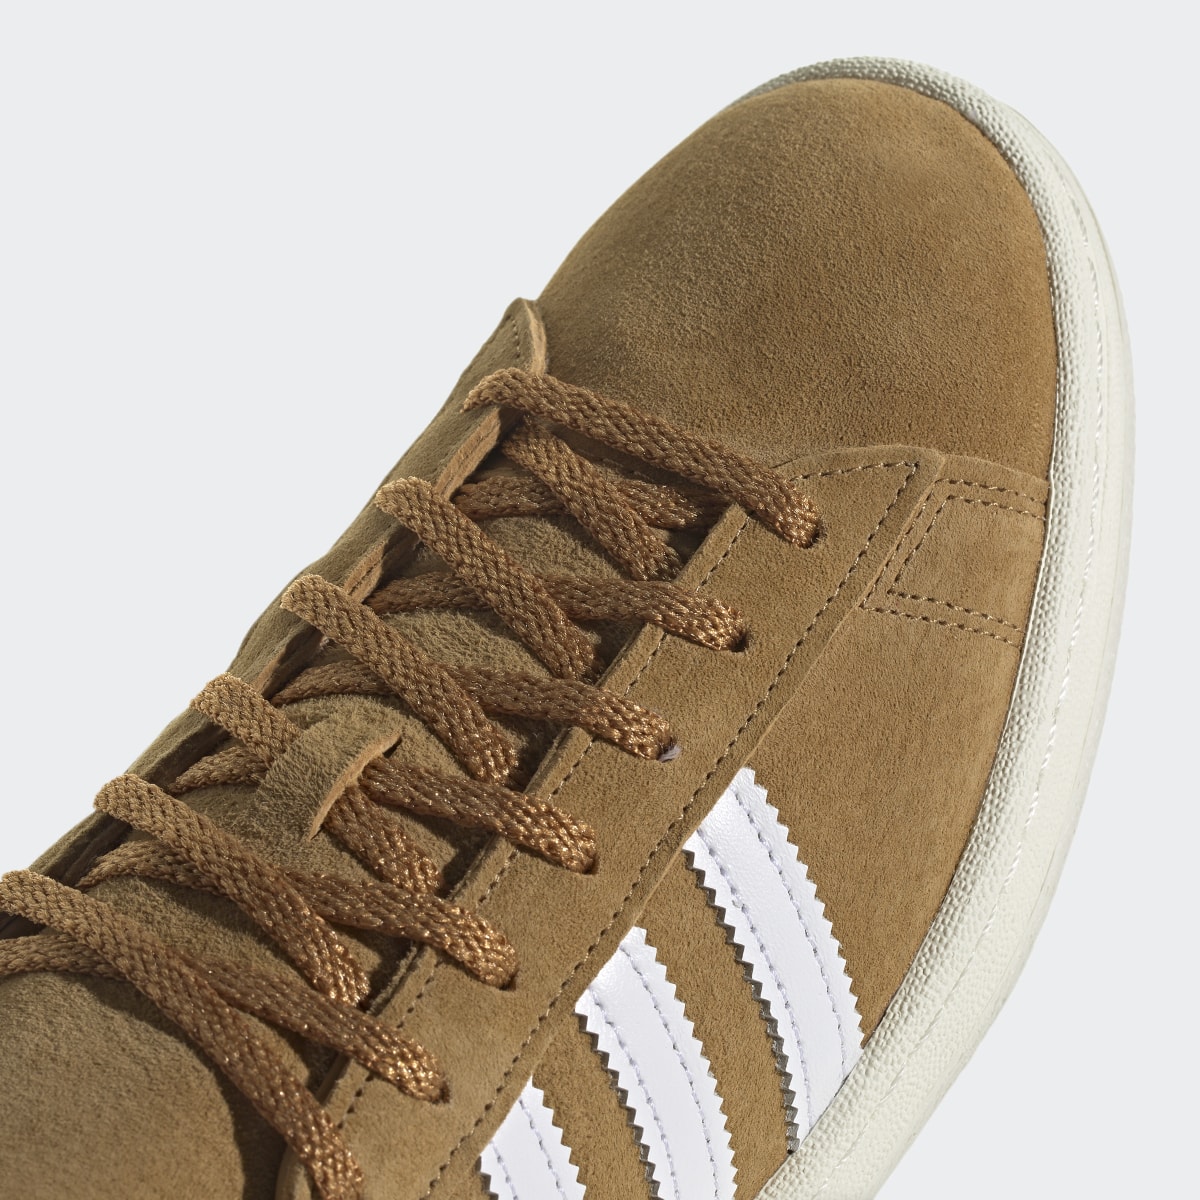 Adidas Campus 80s Shoes. 11